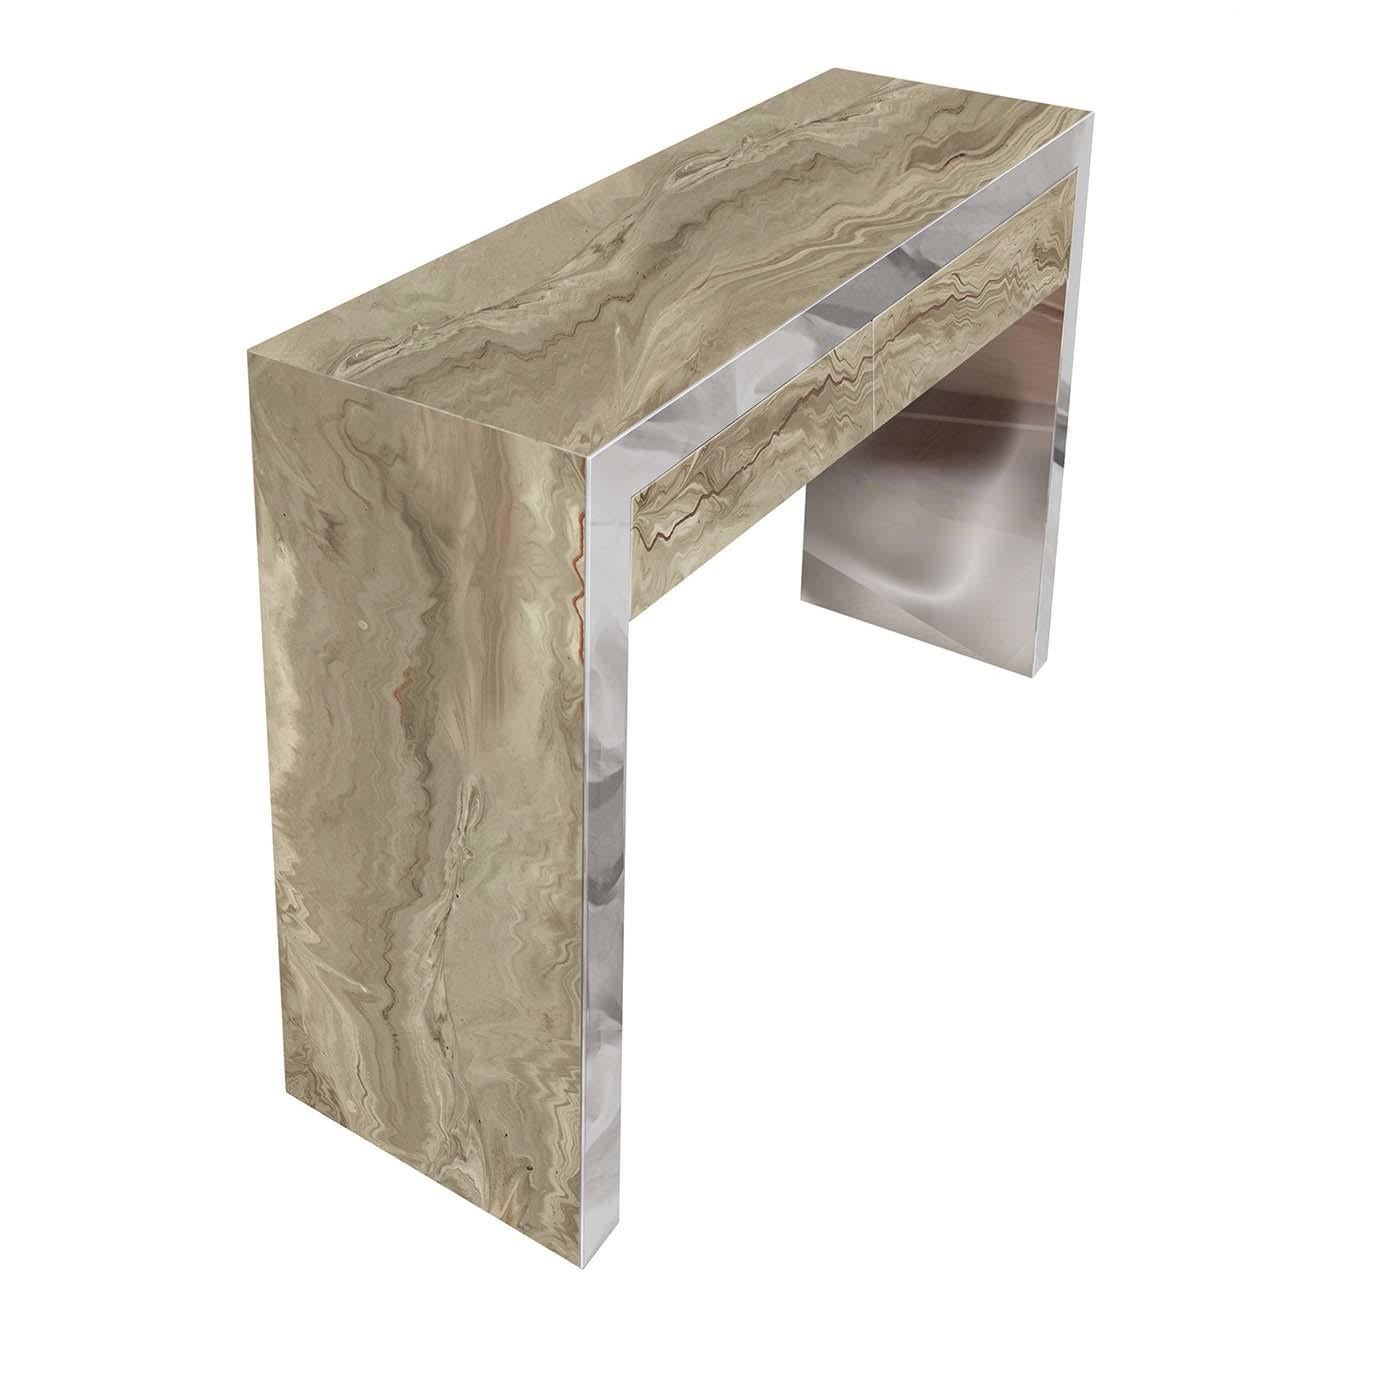 This sophisticated console has a clean-lined silhouette enriched by a superb decoration made of scagliola that will enliven an entryway or living room. The rectangular silhouette with waterfall edges and two front drawers features a polished steel